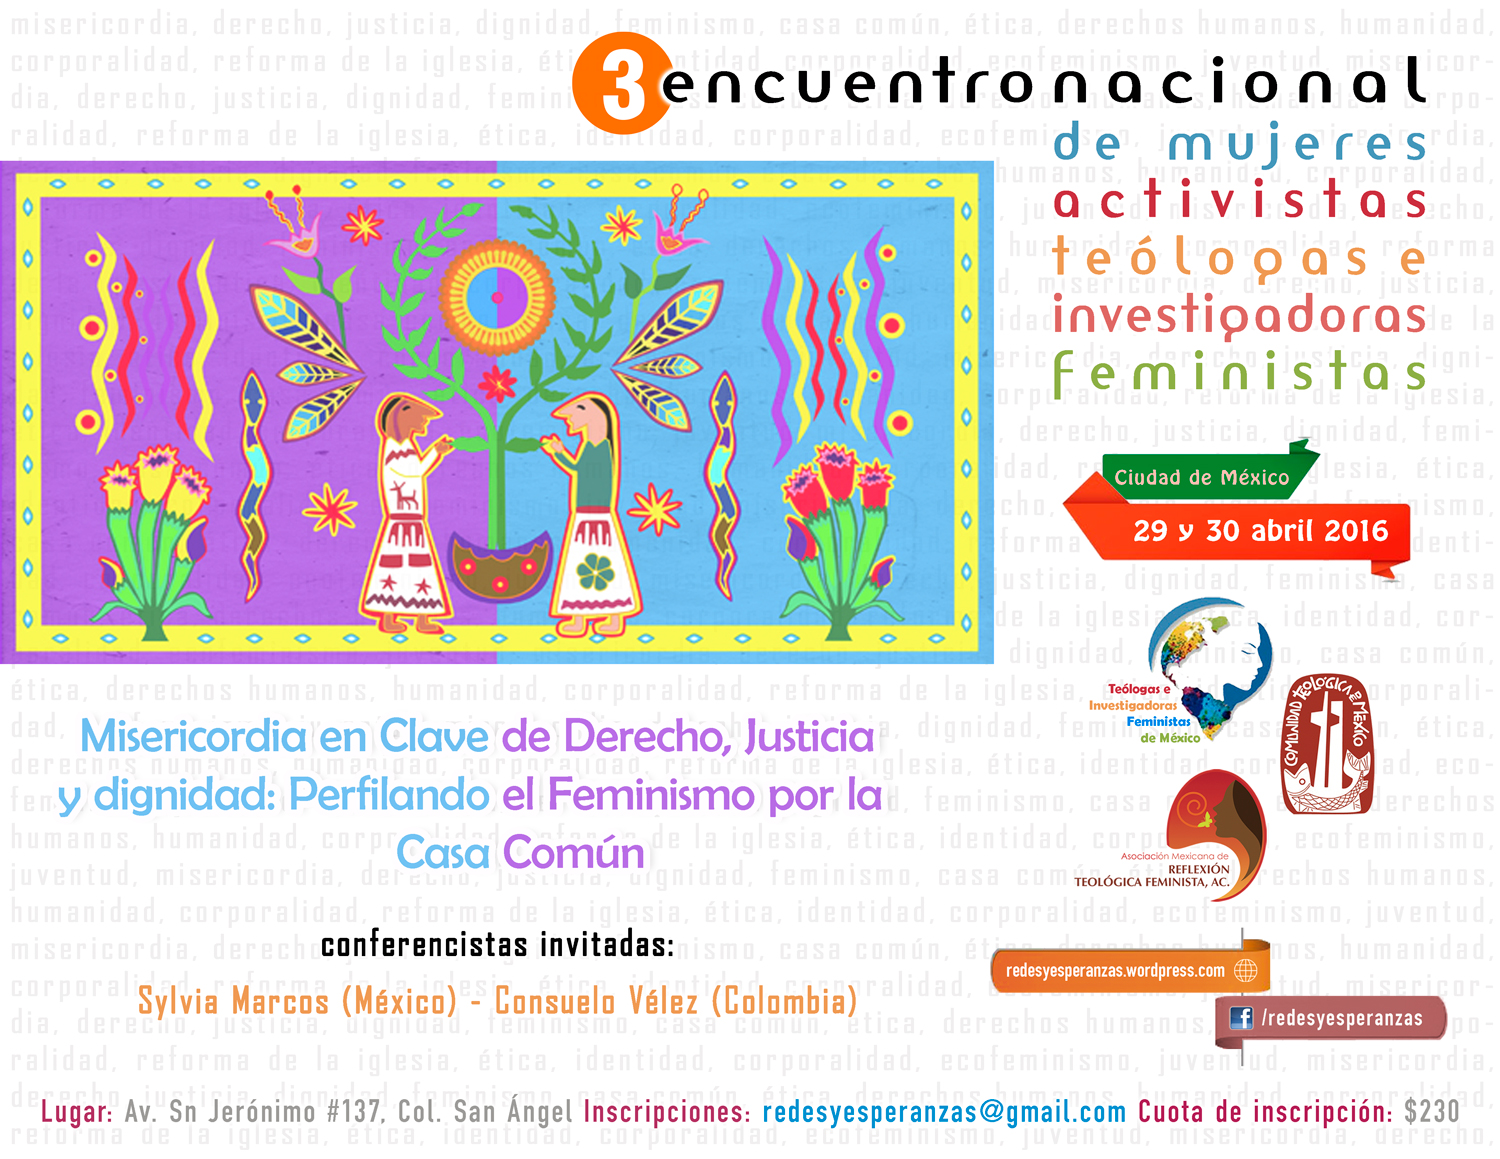 3encuentroteologas2016c